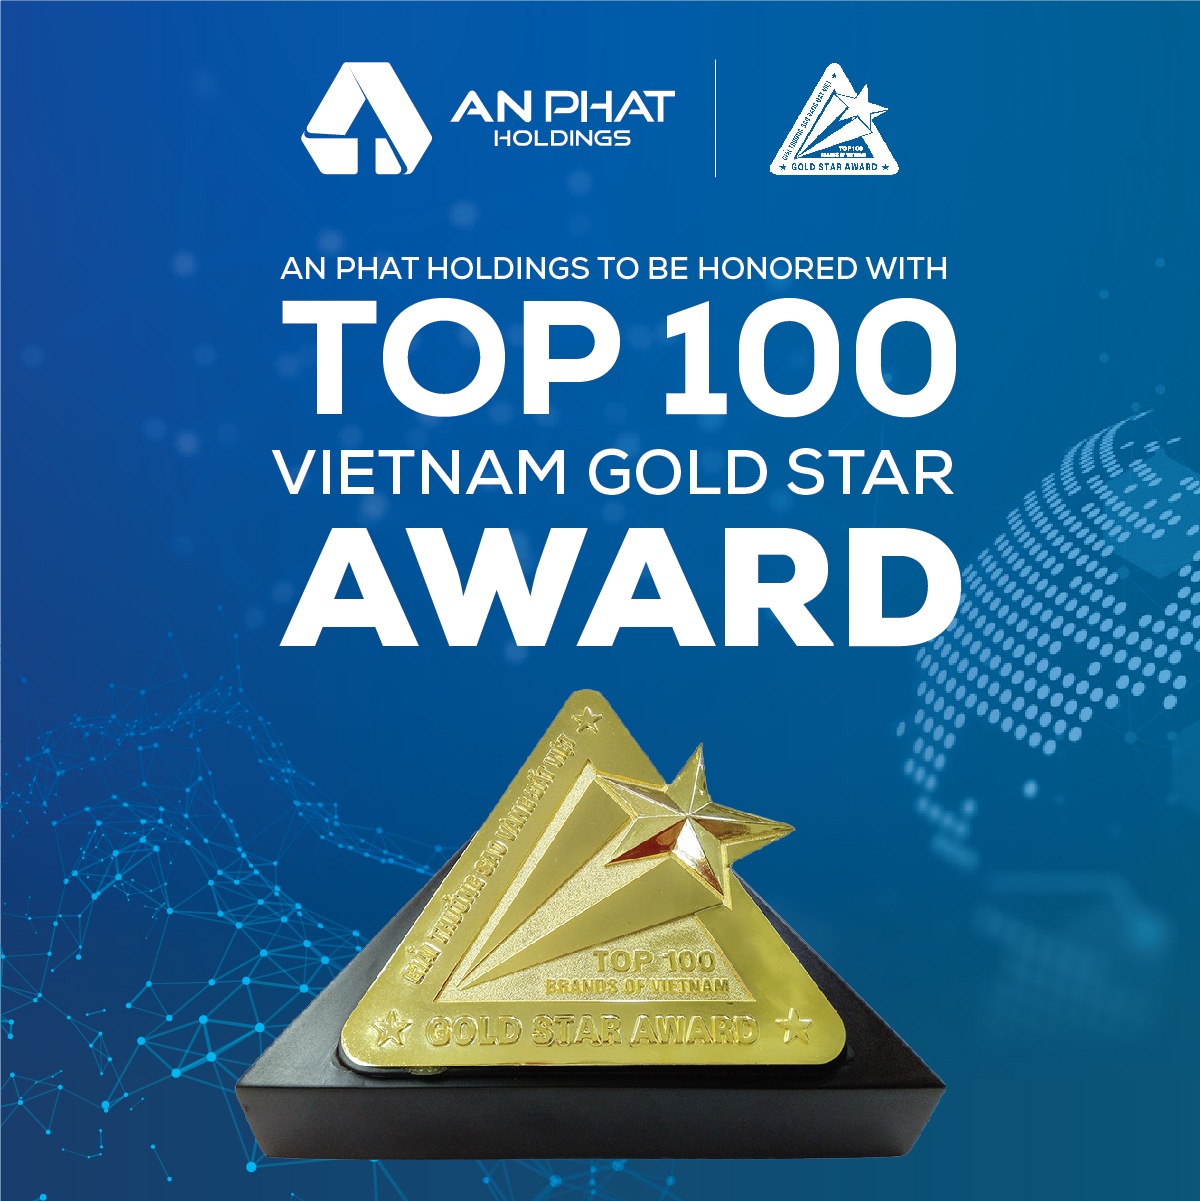 Anh bai sao vang dat vietEng1 1 - An Phat Holdings to be honored with Vietnam gold star award